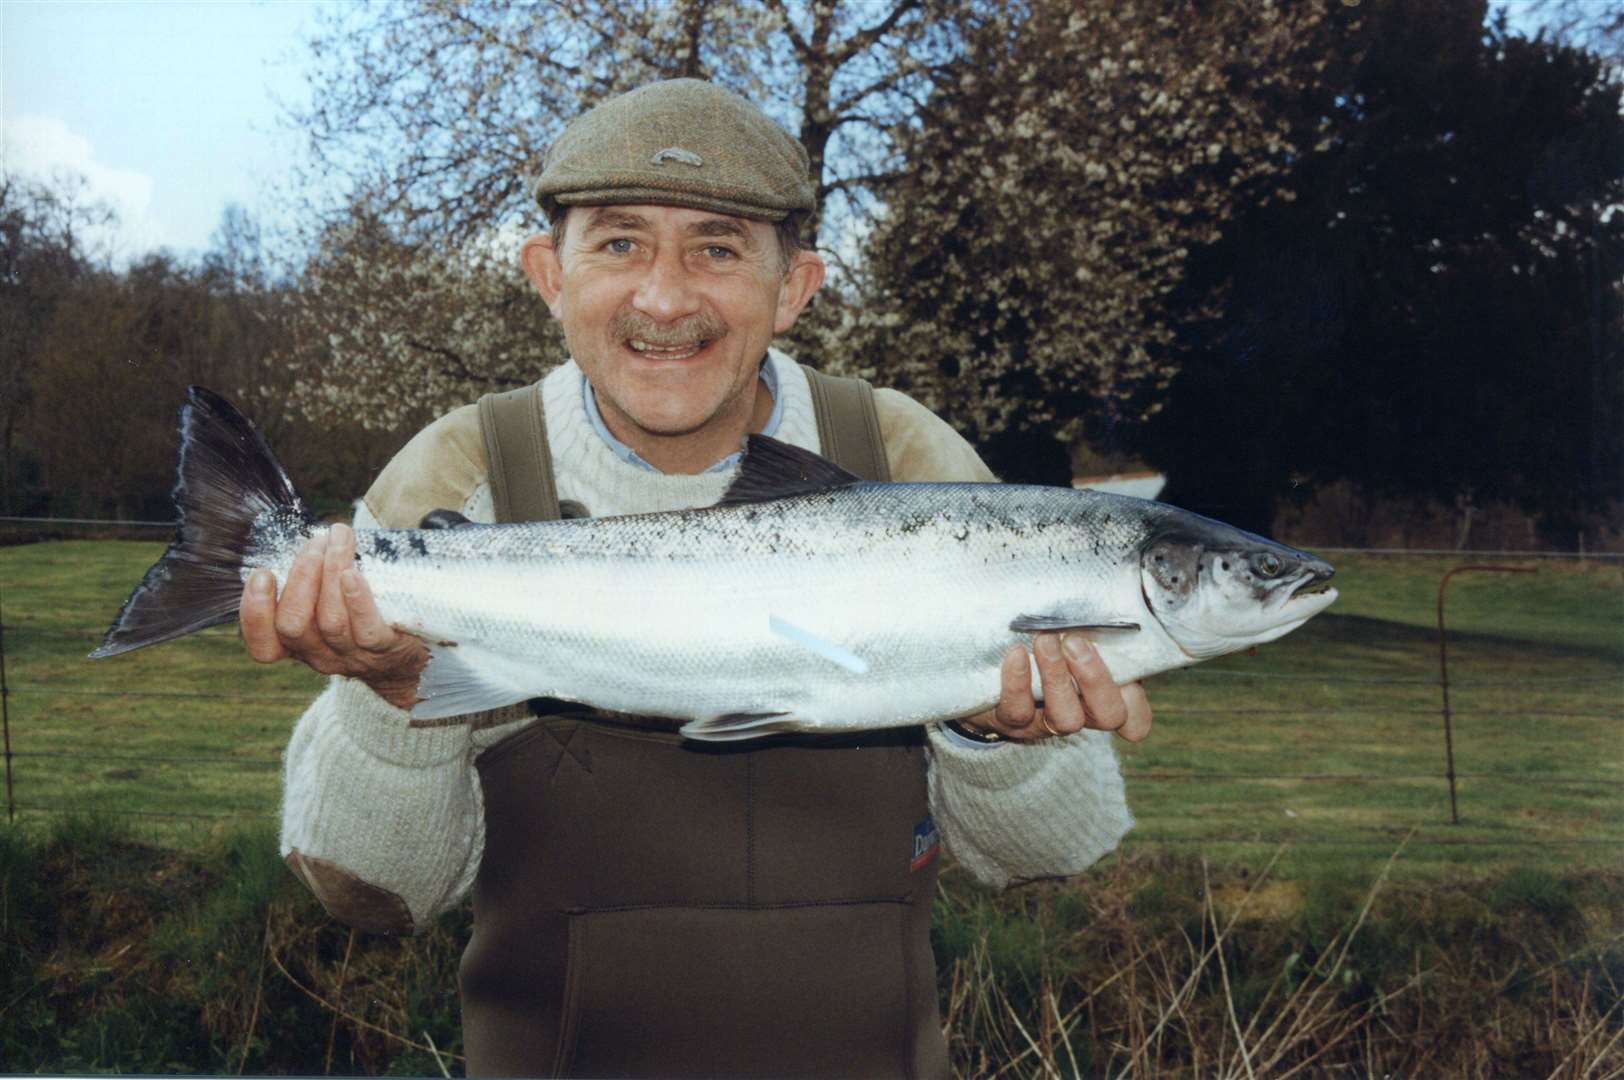 Legendary Scottish angler, TV presenter and former actor Paul Young is returning to screens.